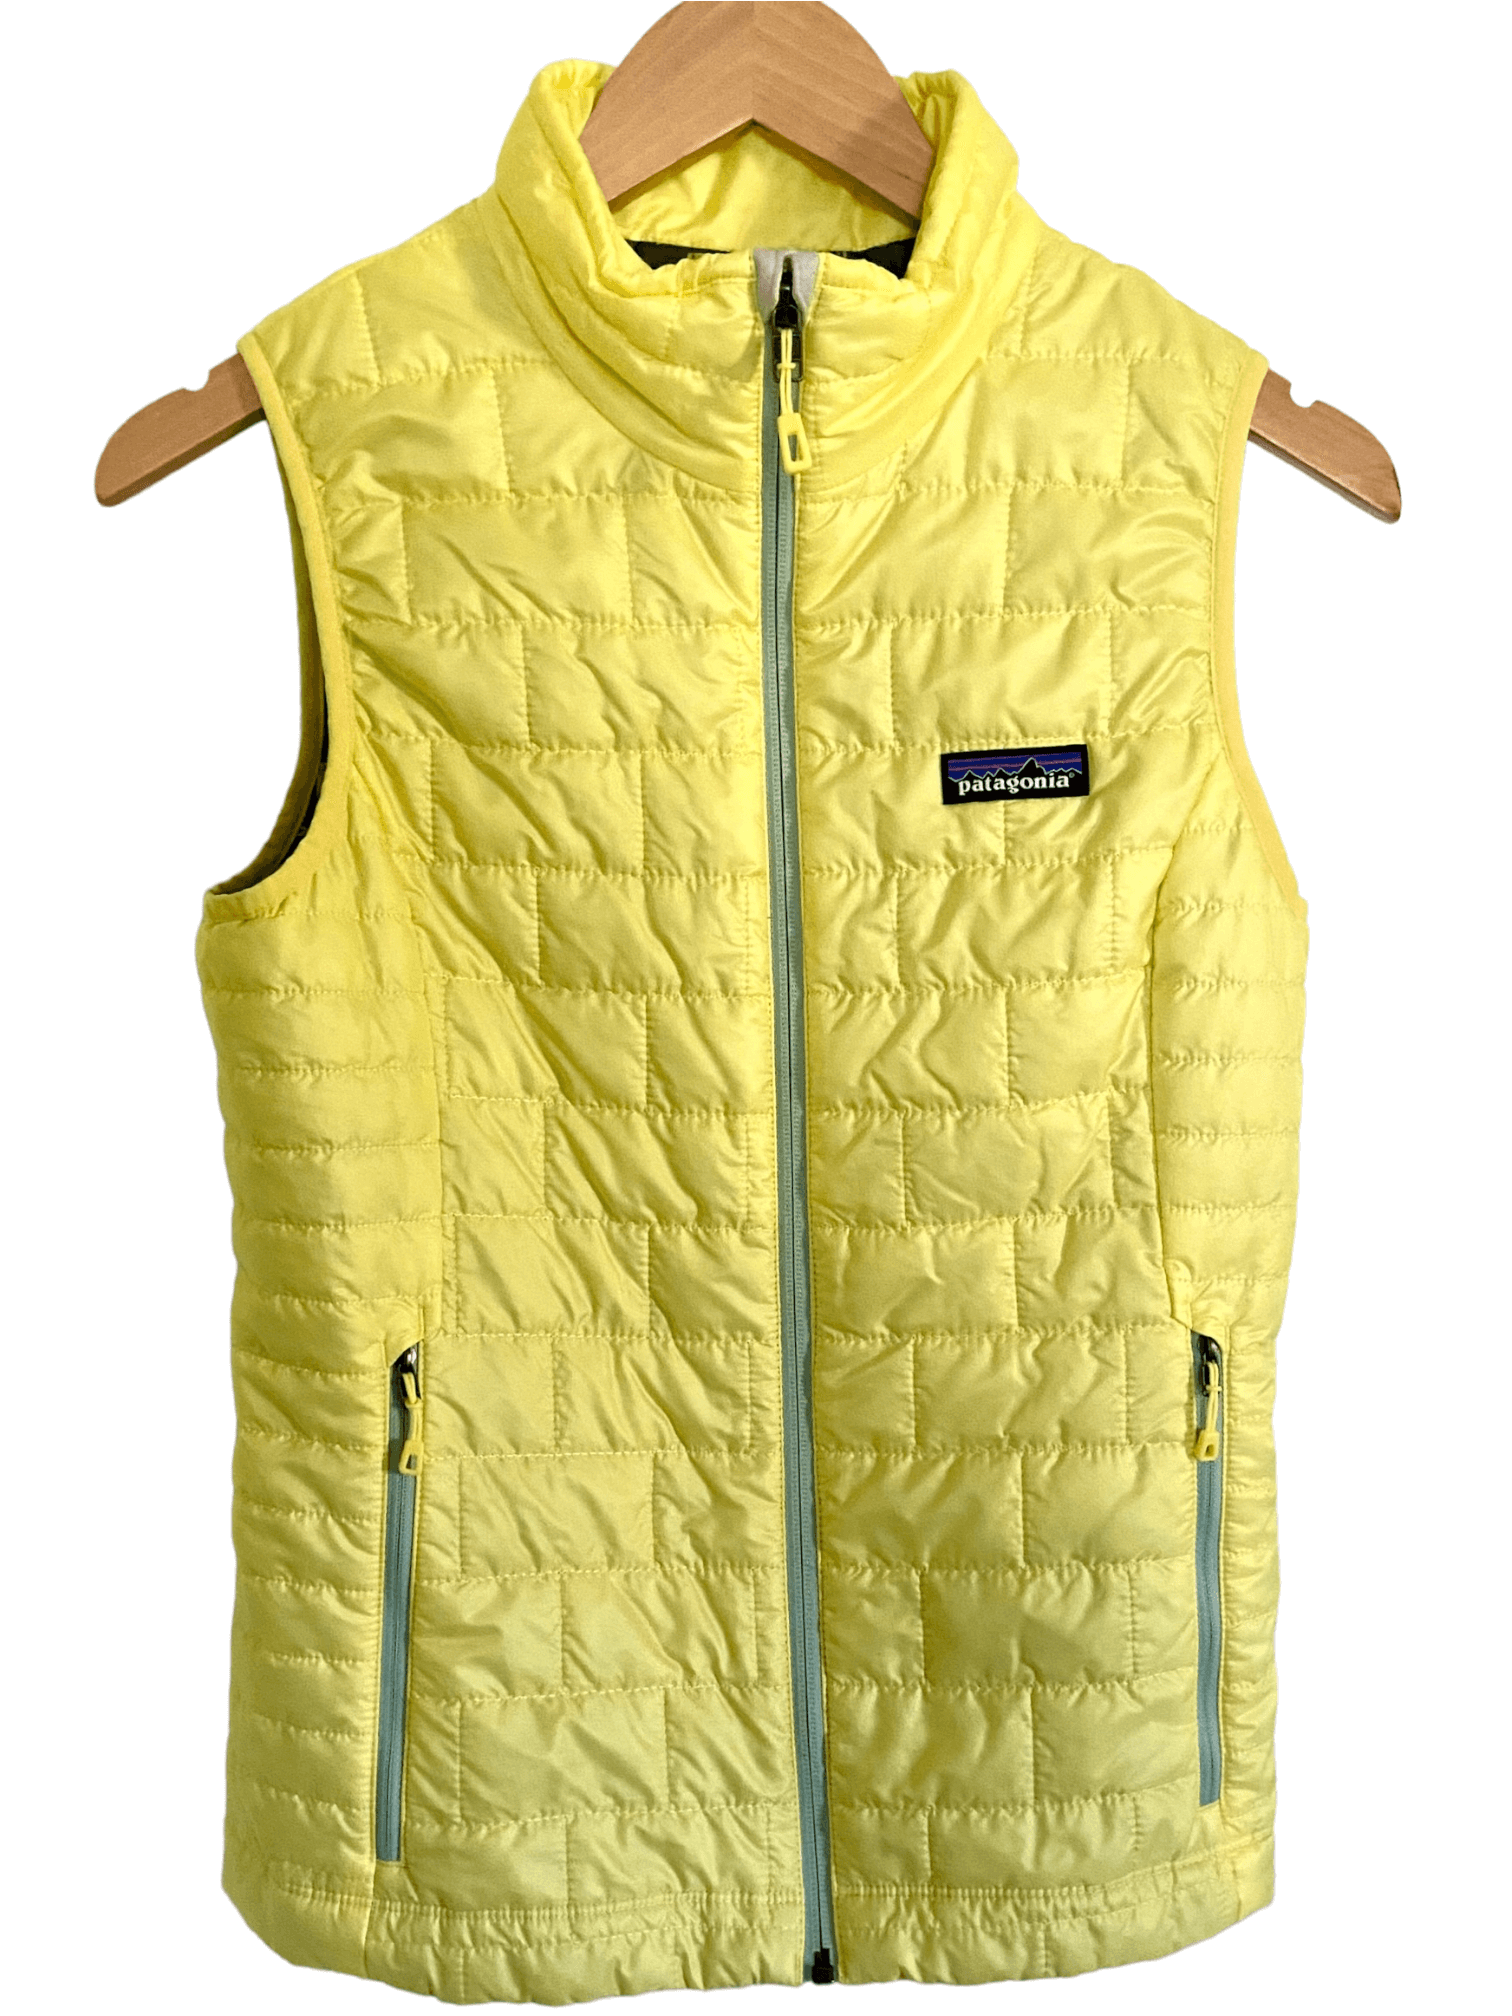 Cool Winter PATAGONIA canary yellow puffer vest